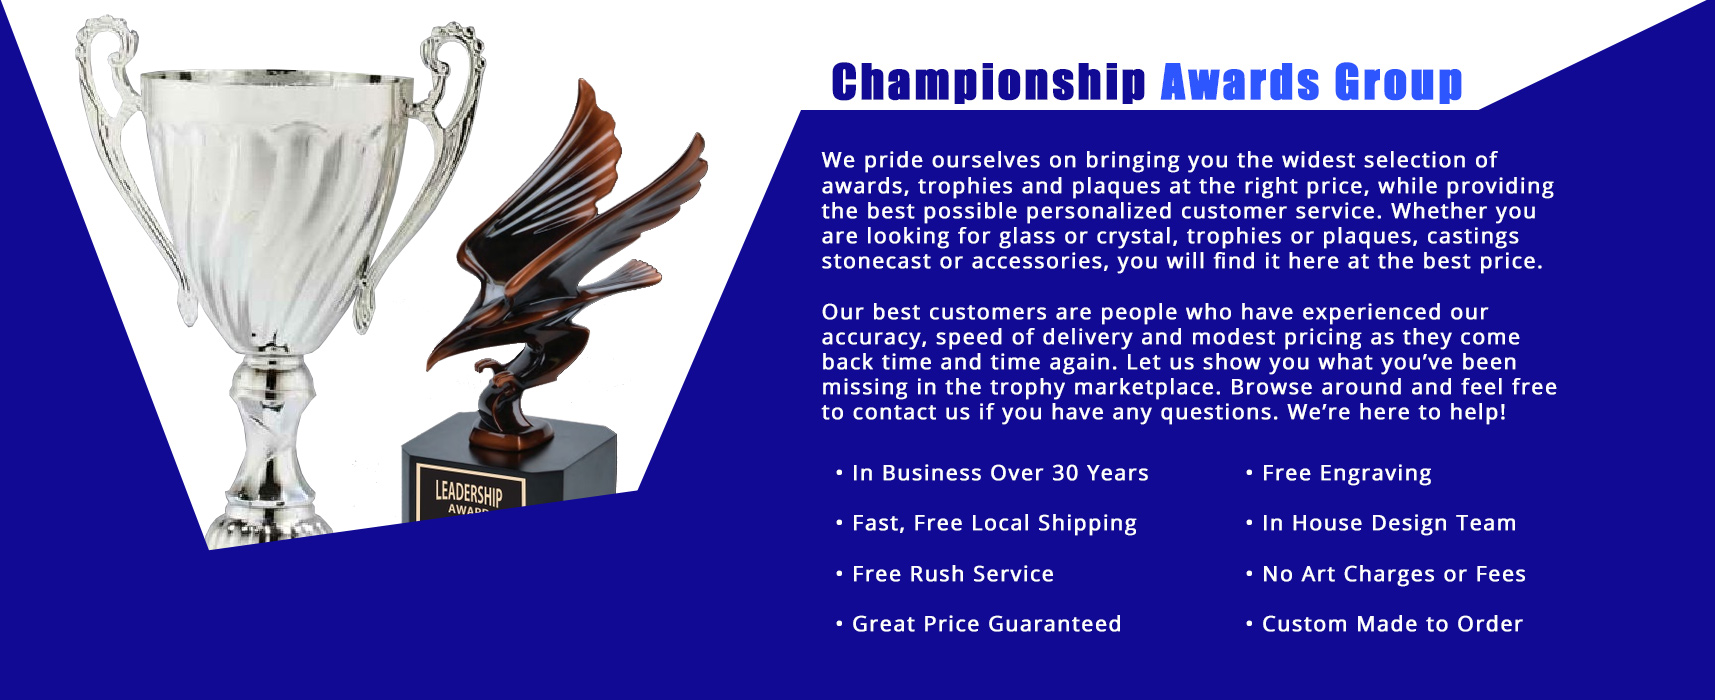 fast free shipping. Free rush service. Free engraving. No art charges or extra fees. Custom made to order. Great price guaranteed on trophies, awards, plaques, and more